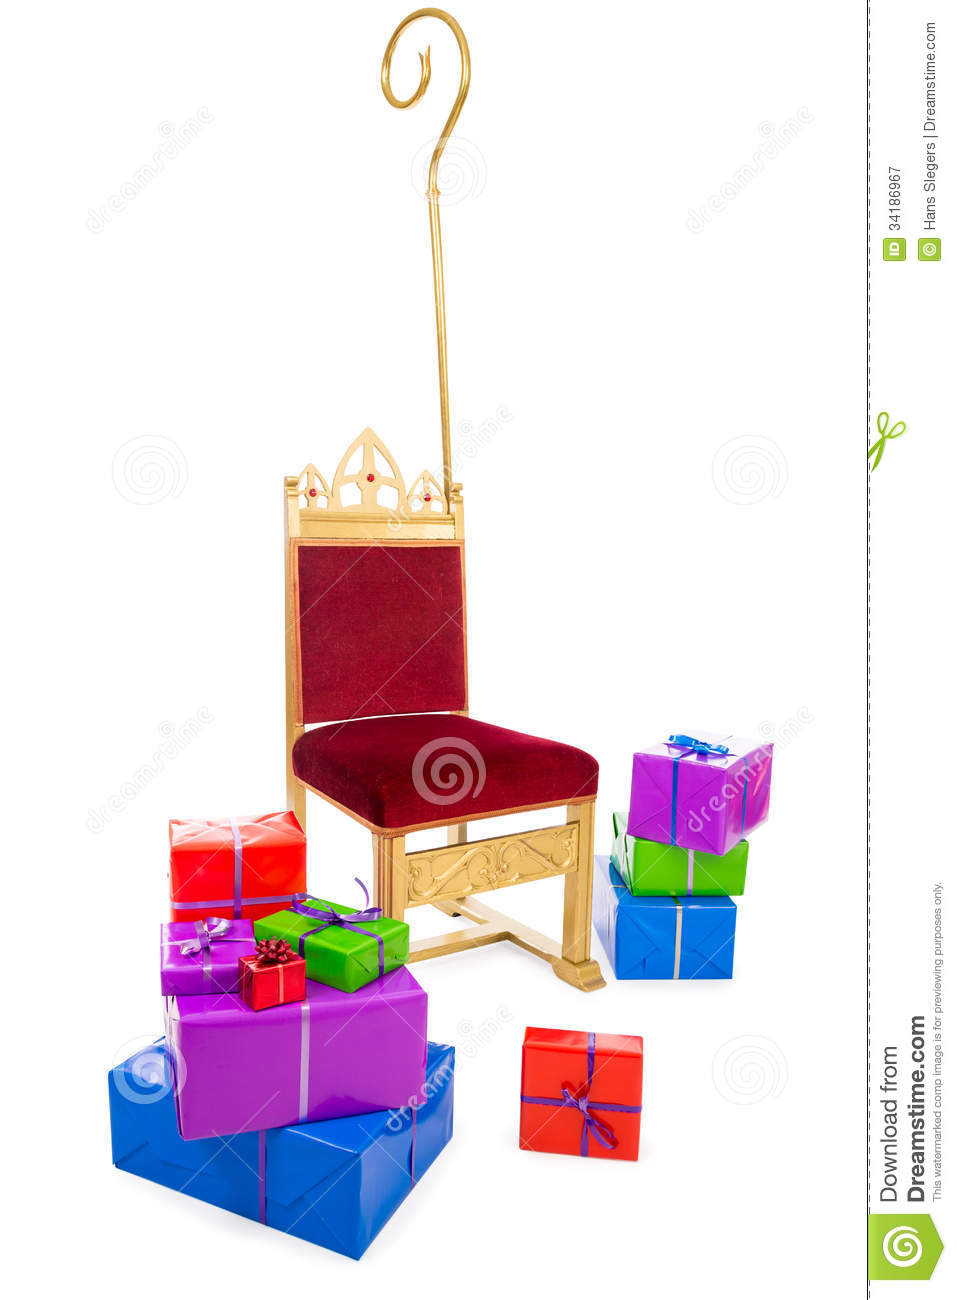 Chair Of Sinterklaas Clipping Path Included  Typical Dutch Character